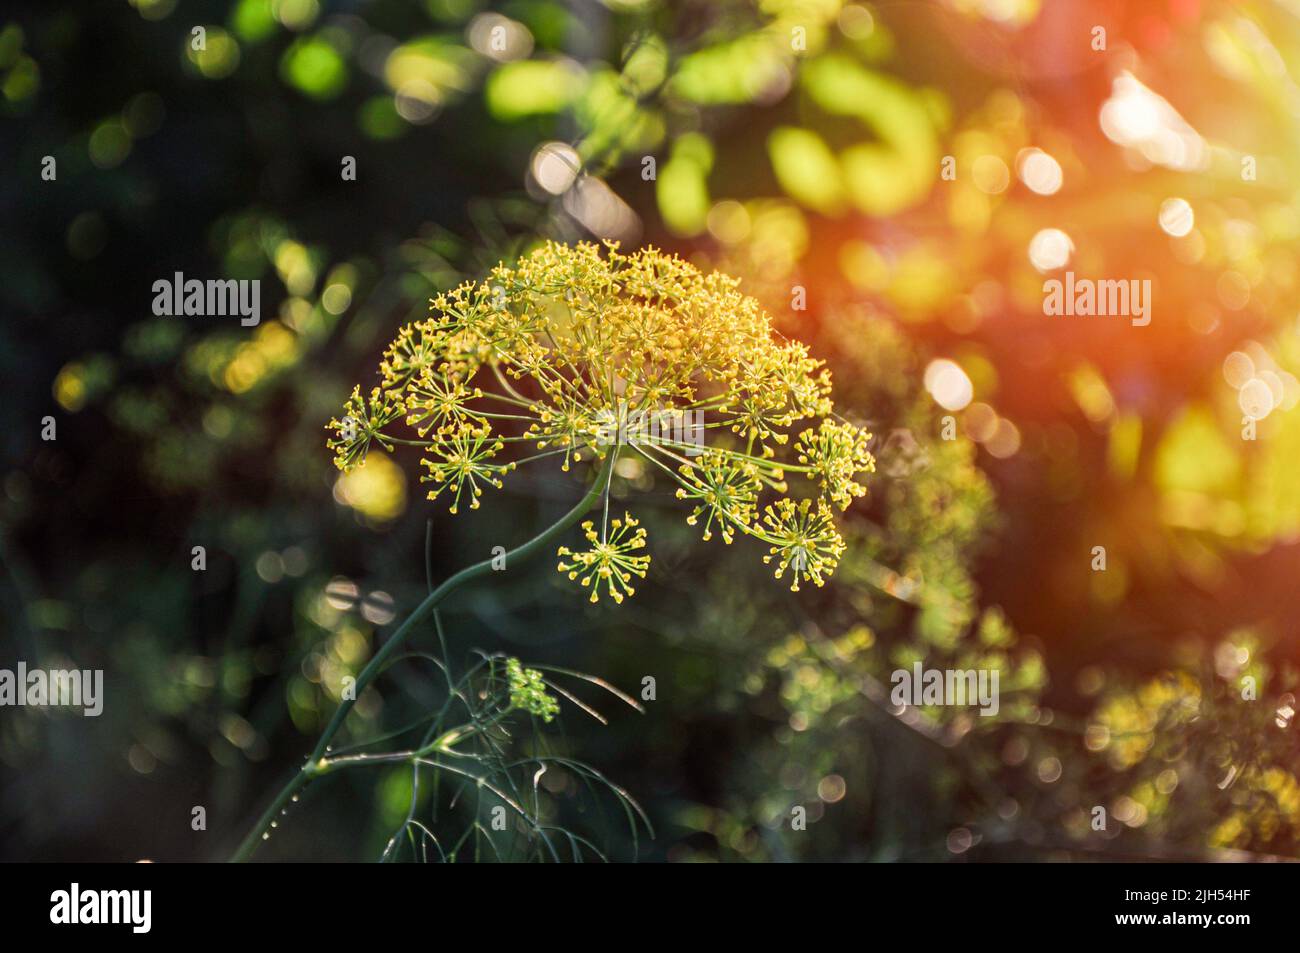 Dill (Anethum graveolens), umbelliferous aromatic plant with umbrella-shaped clusters of yellow flowers Stock Photo